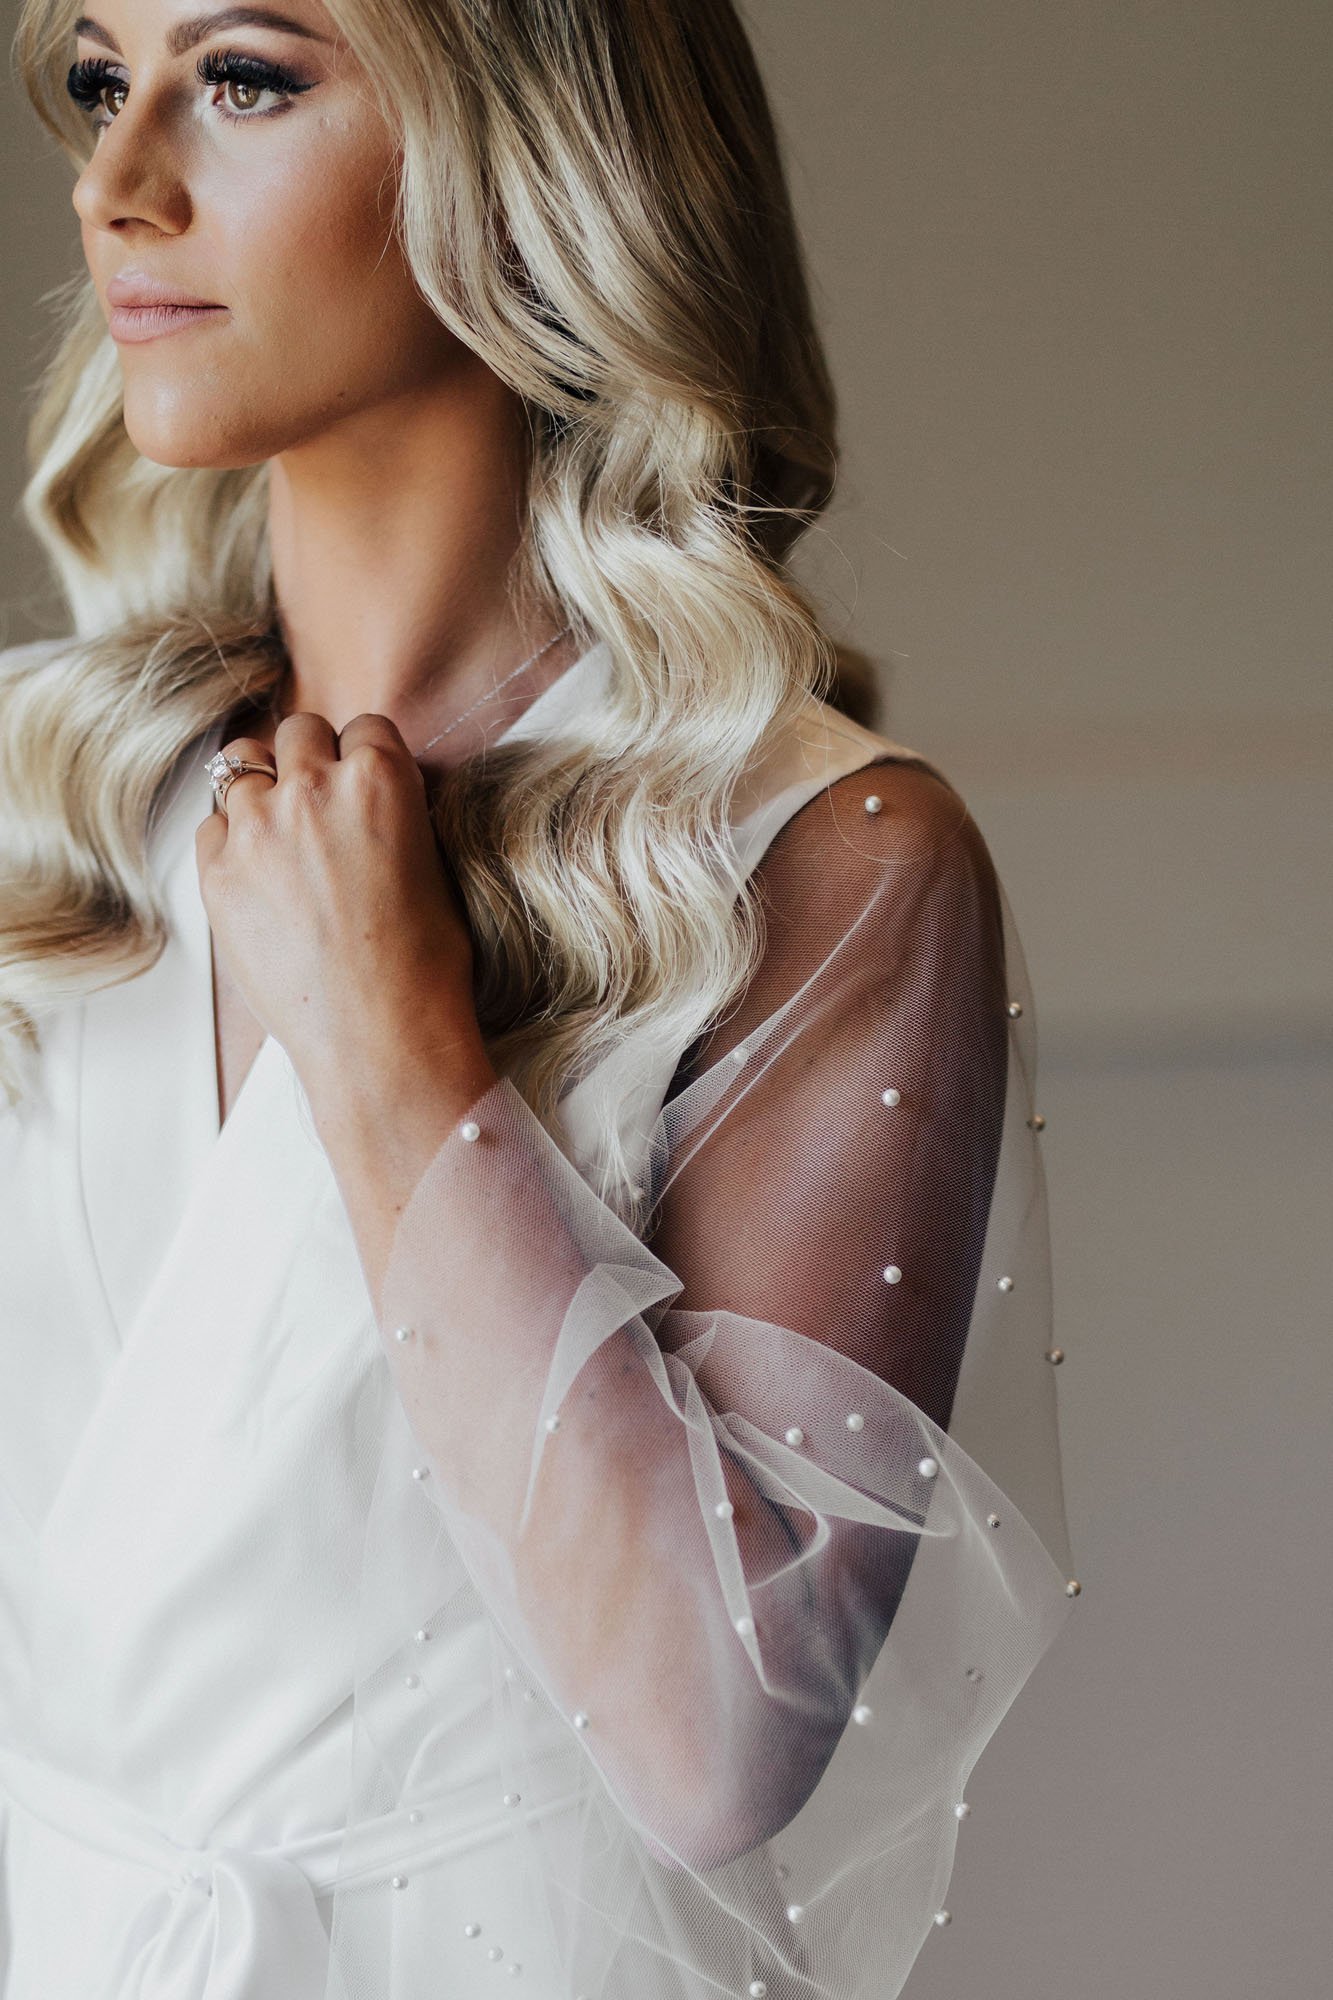  Photograph of a bride with long blonde hair in soft curls. She is wearing a white robe with sheer tulle sleeves flocked in pearls, and is looking off in the distance. She has her left hand help up to her neck holding her necklace, and is wearing an 